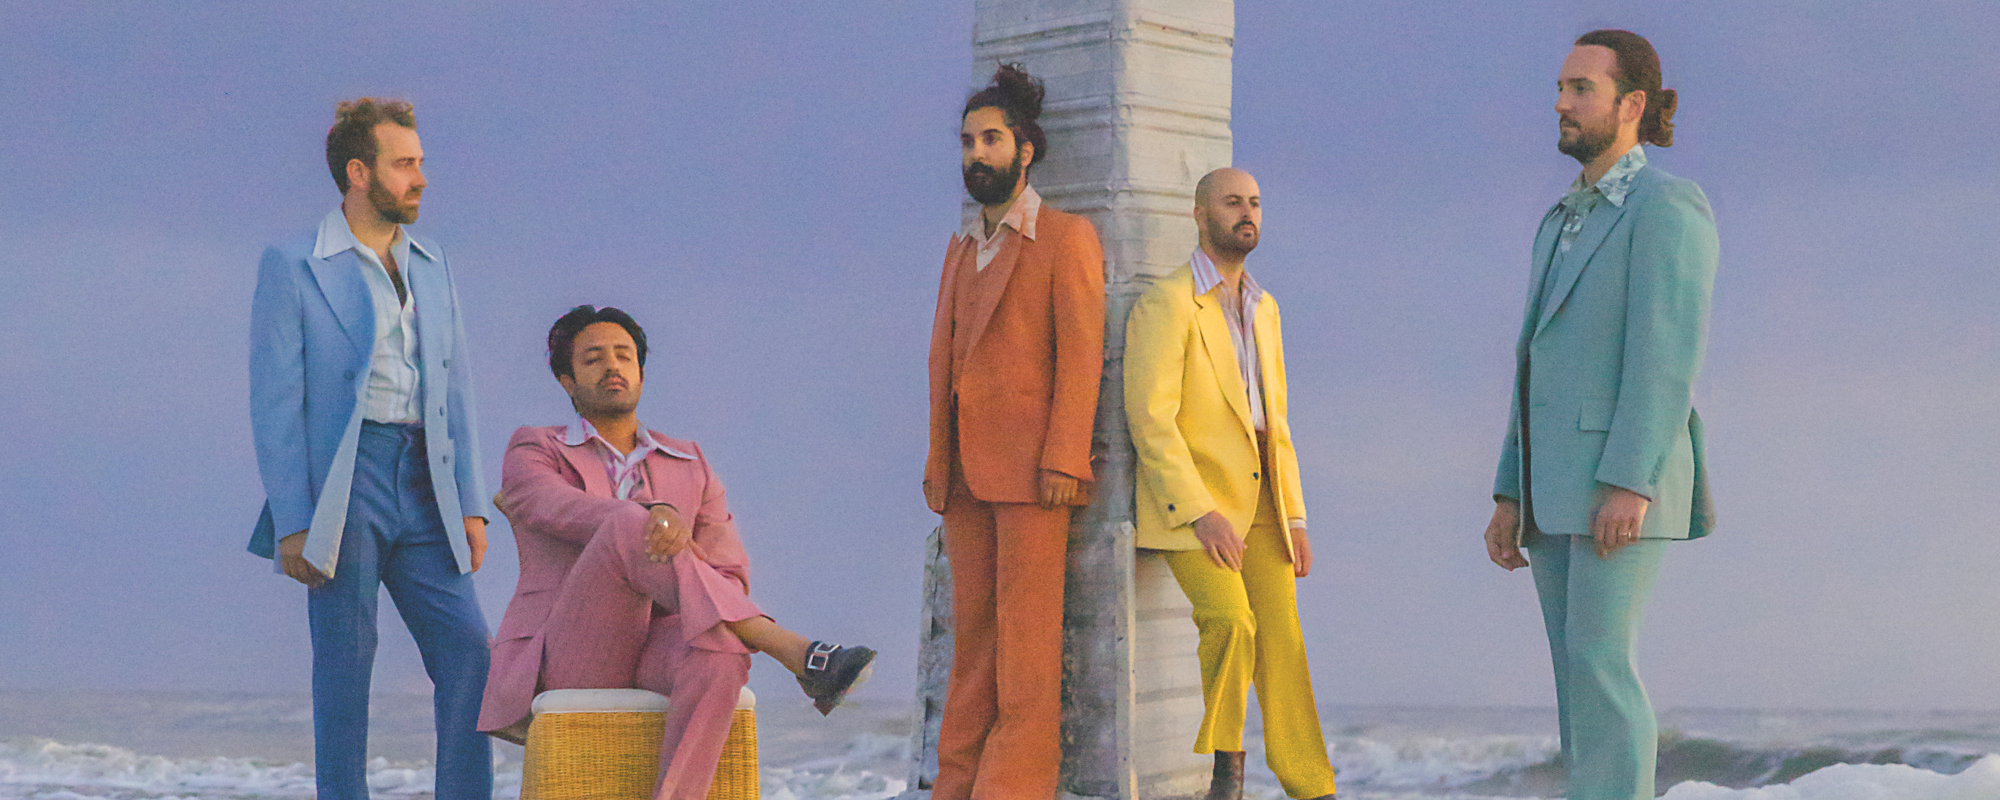 “100 Songs Later” Young the Giant Returns with Part 1 of New Album